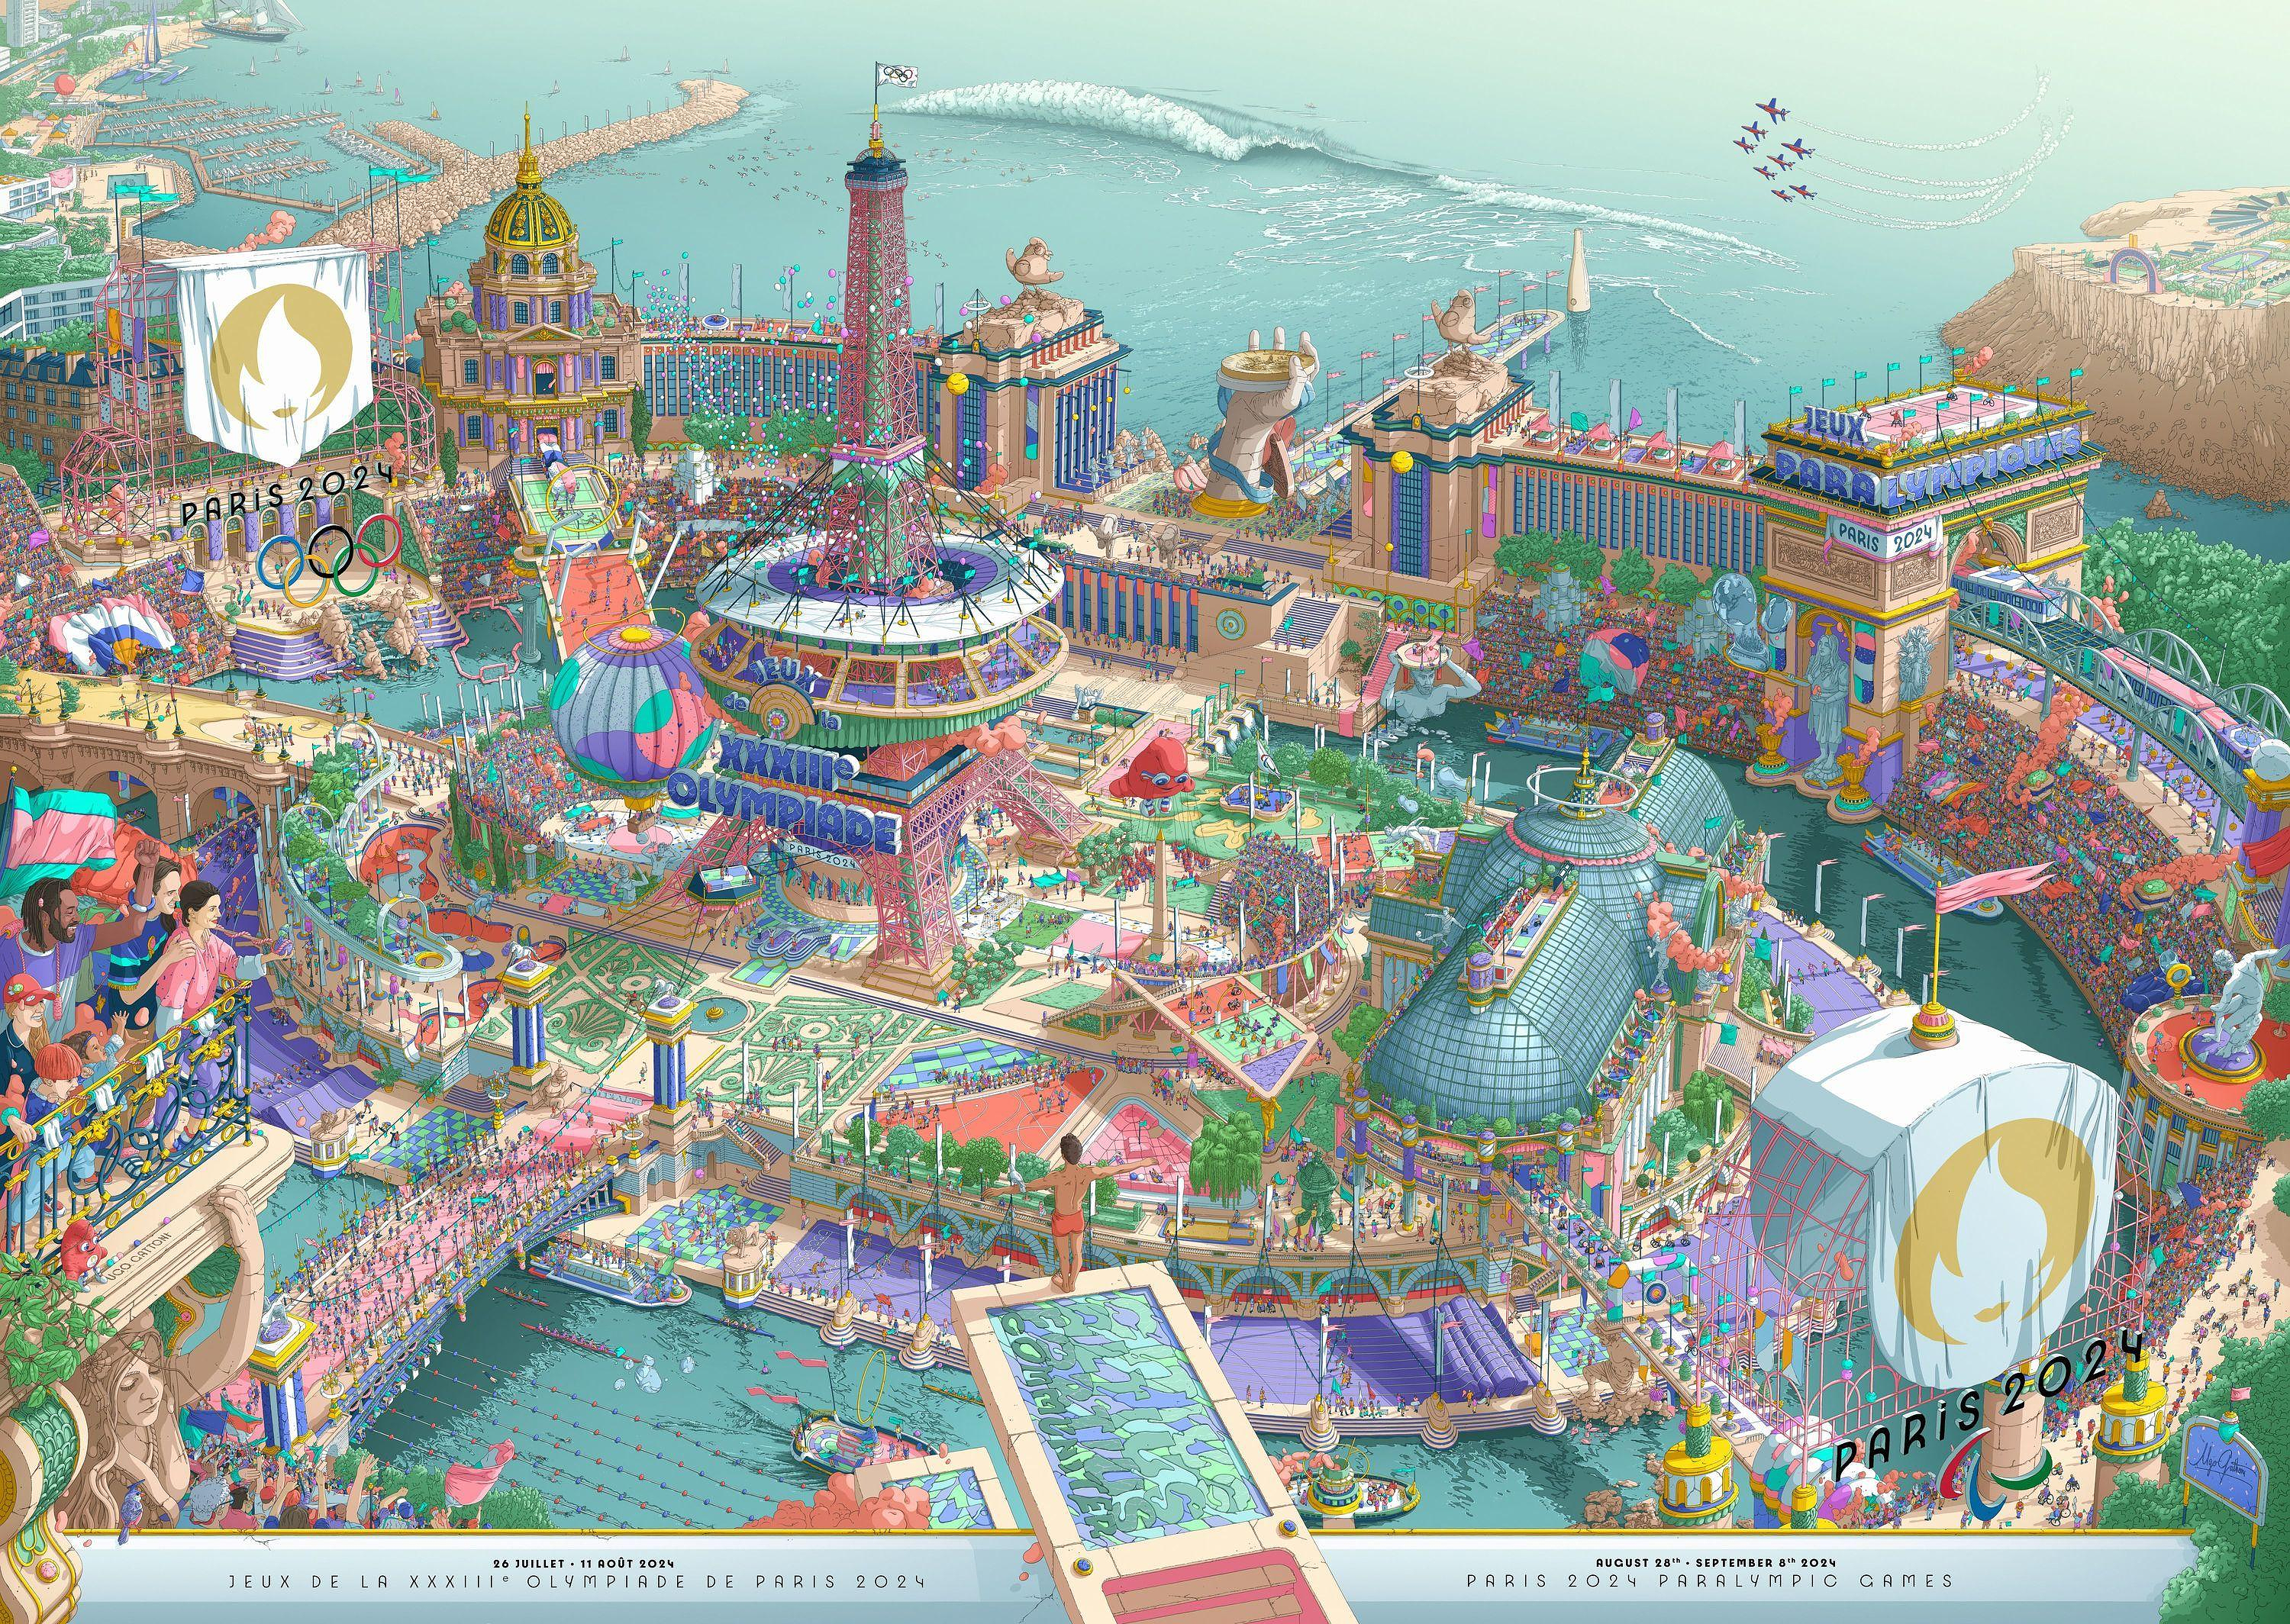 Paris 2024 Olympic Games: the Games are displayed in a festive fresco with 40,000 characters